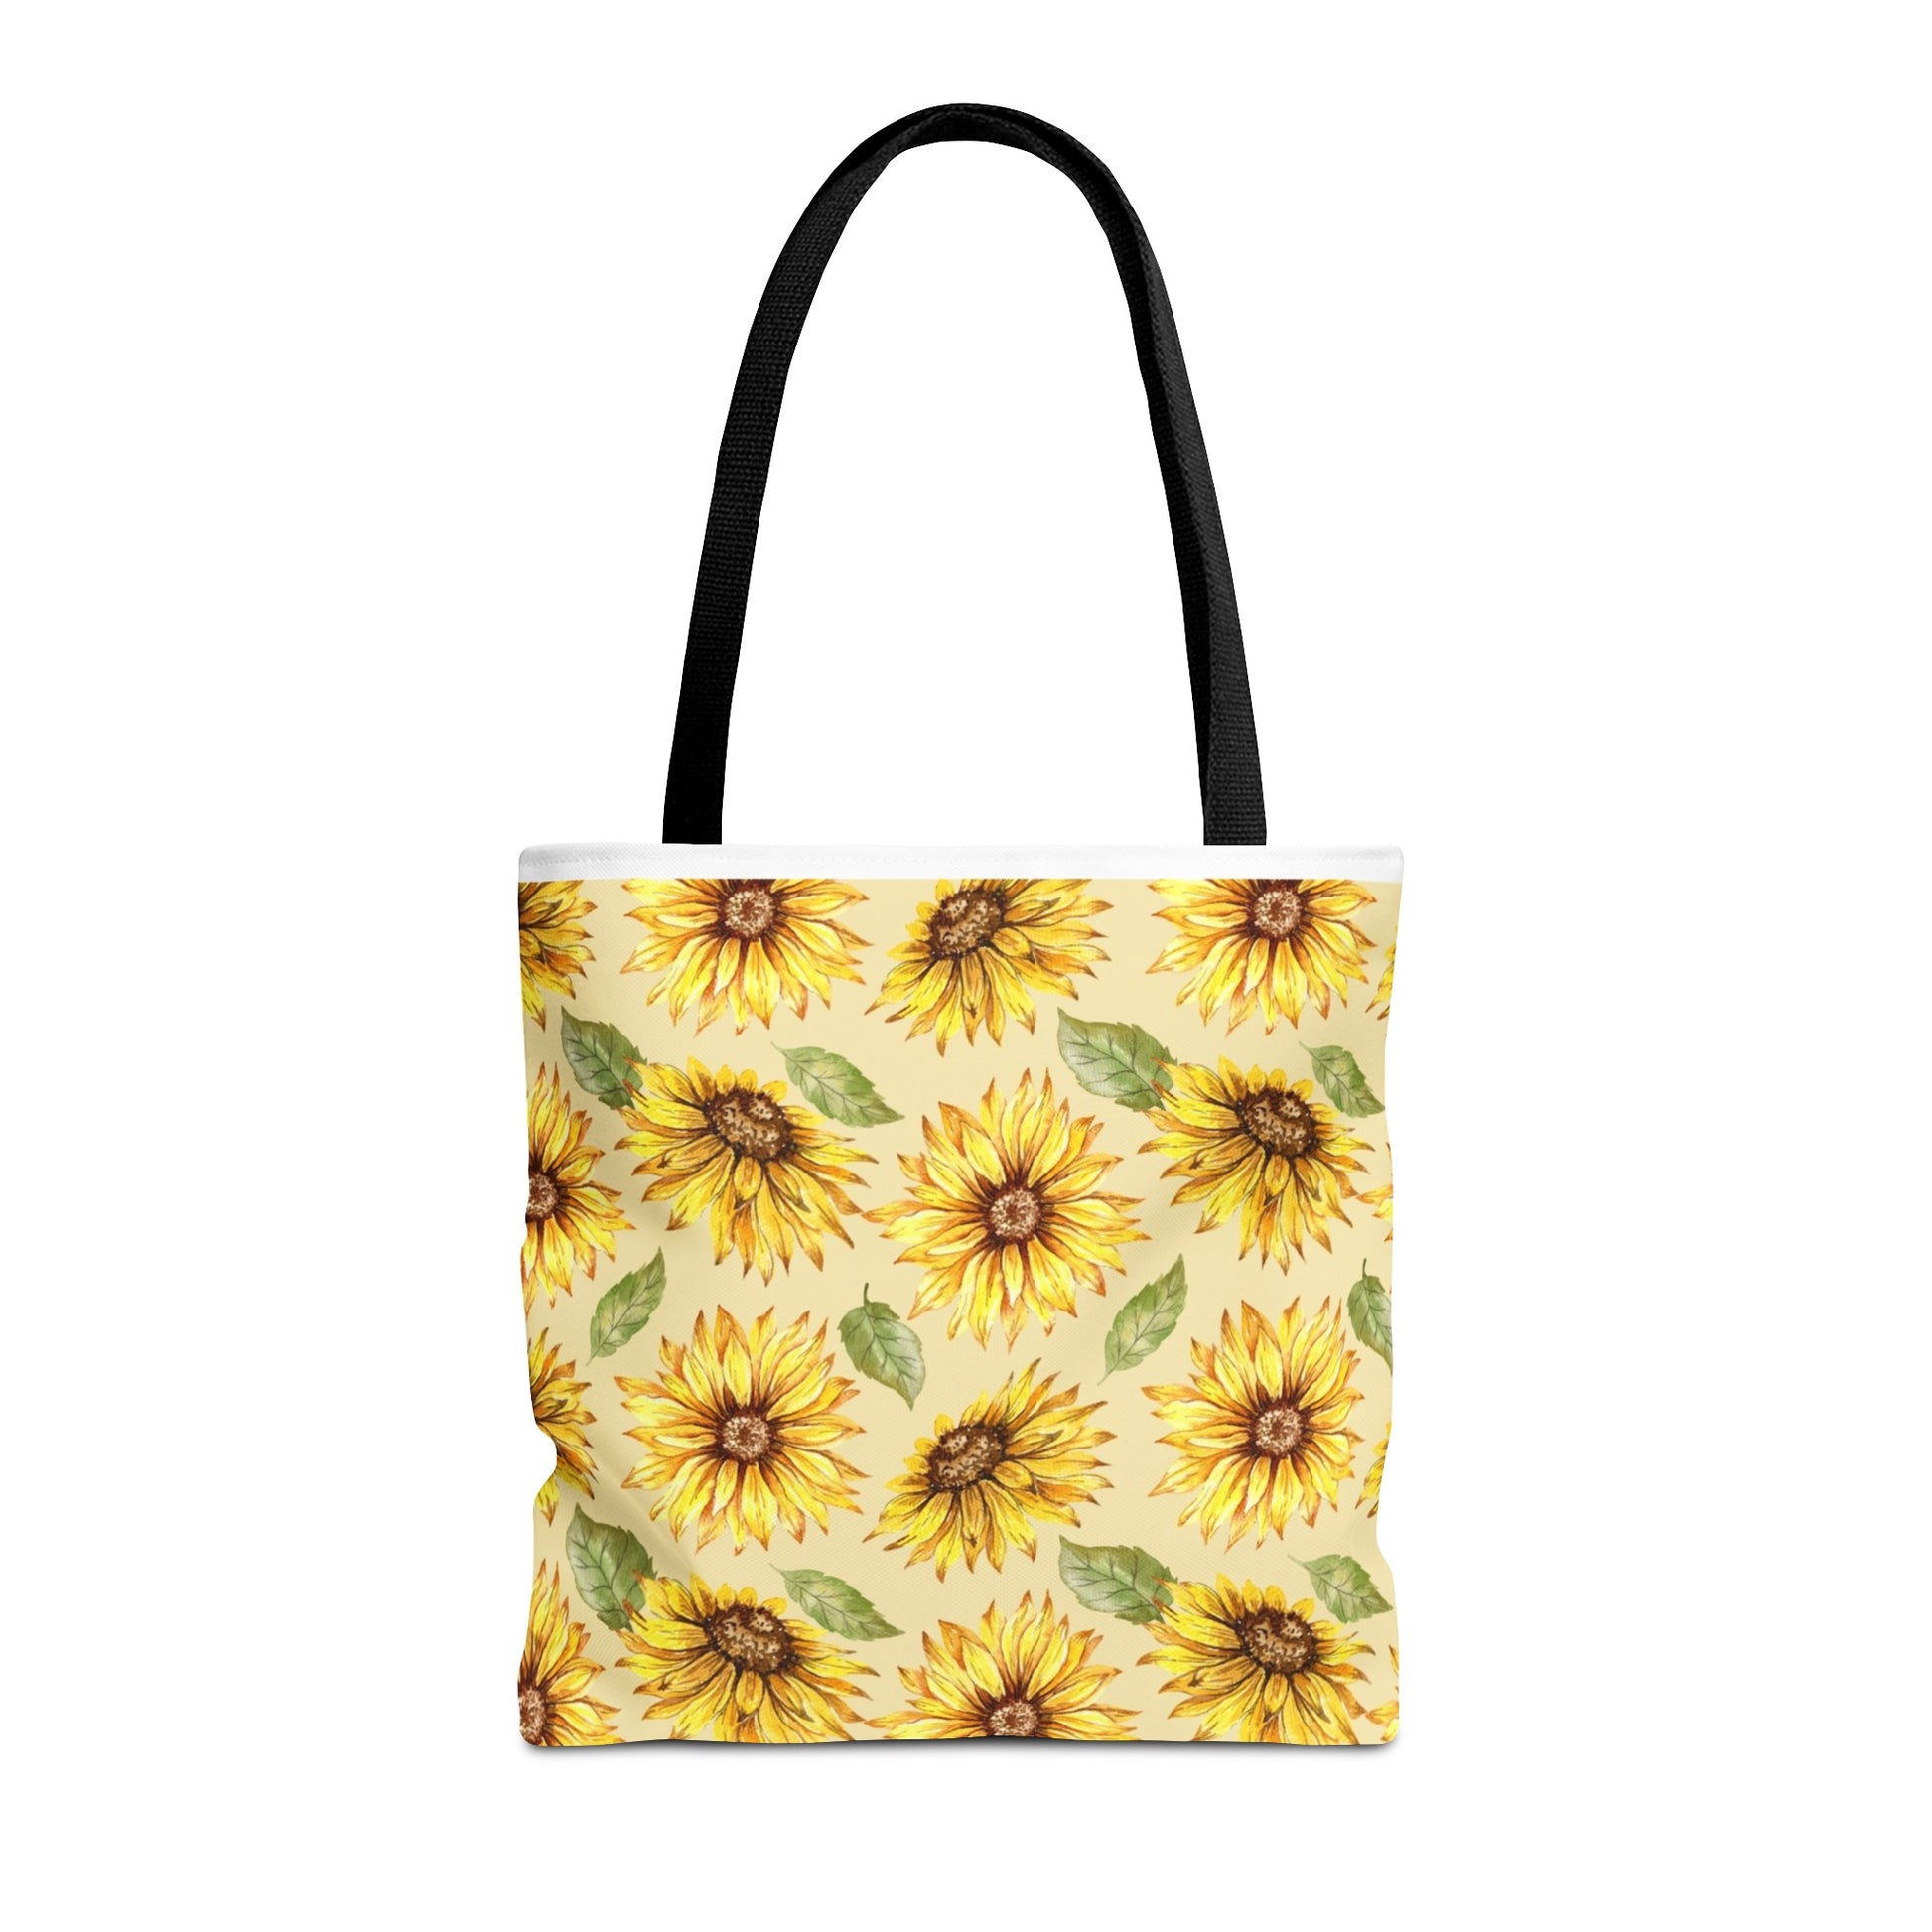 A Yellow Floral Tote Bag by Printify with a sunflower print on a light yellow background, featuring black handles and assembled in the USA.